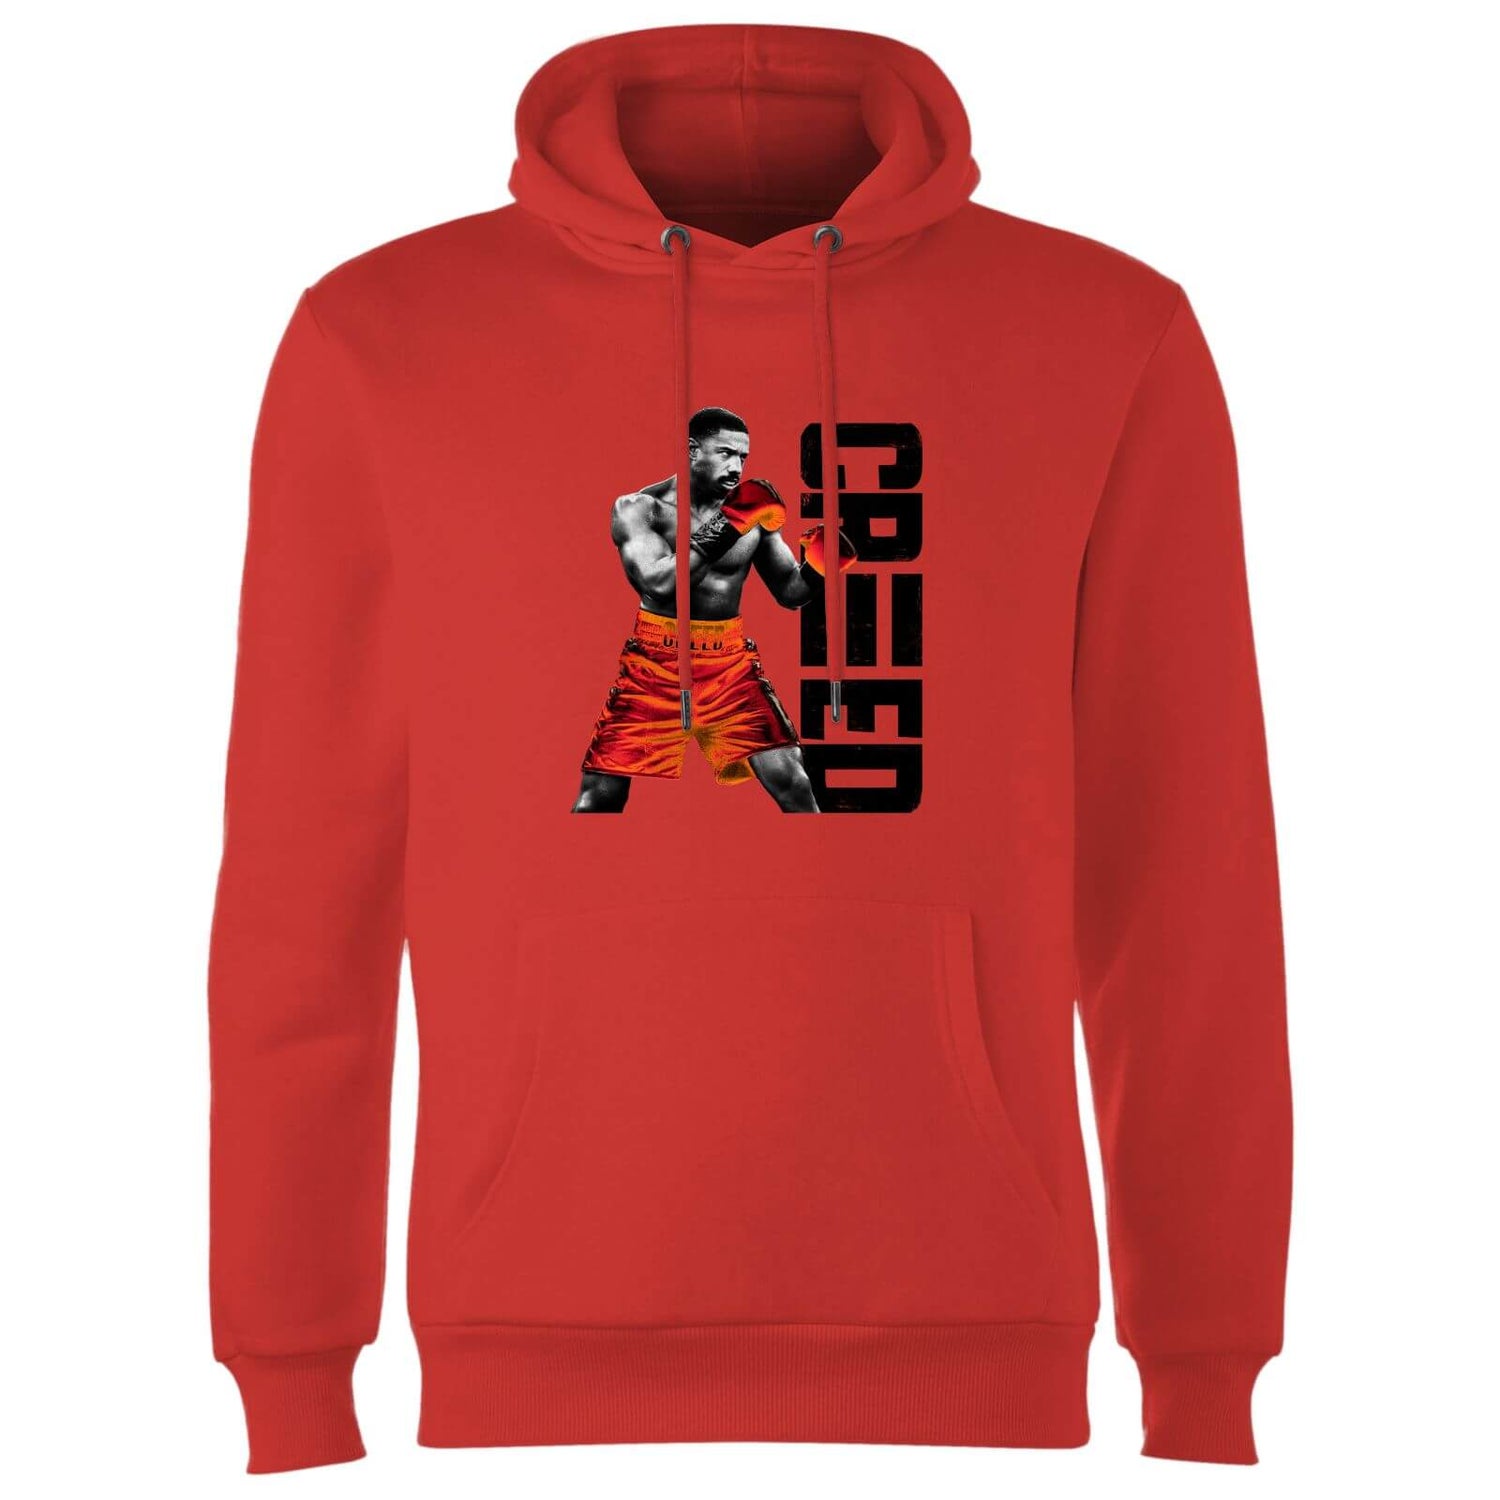 Creed CRIIID Hoodie - Red